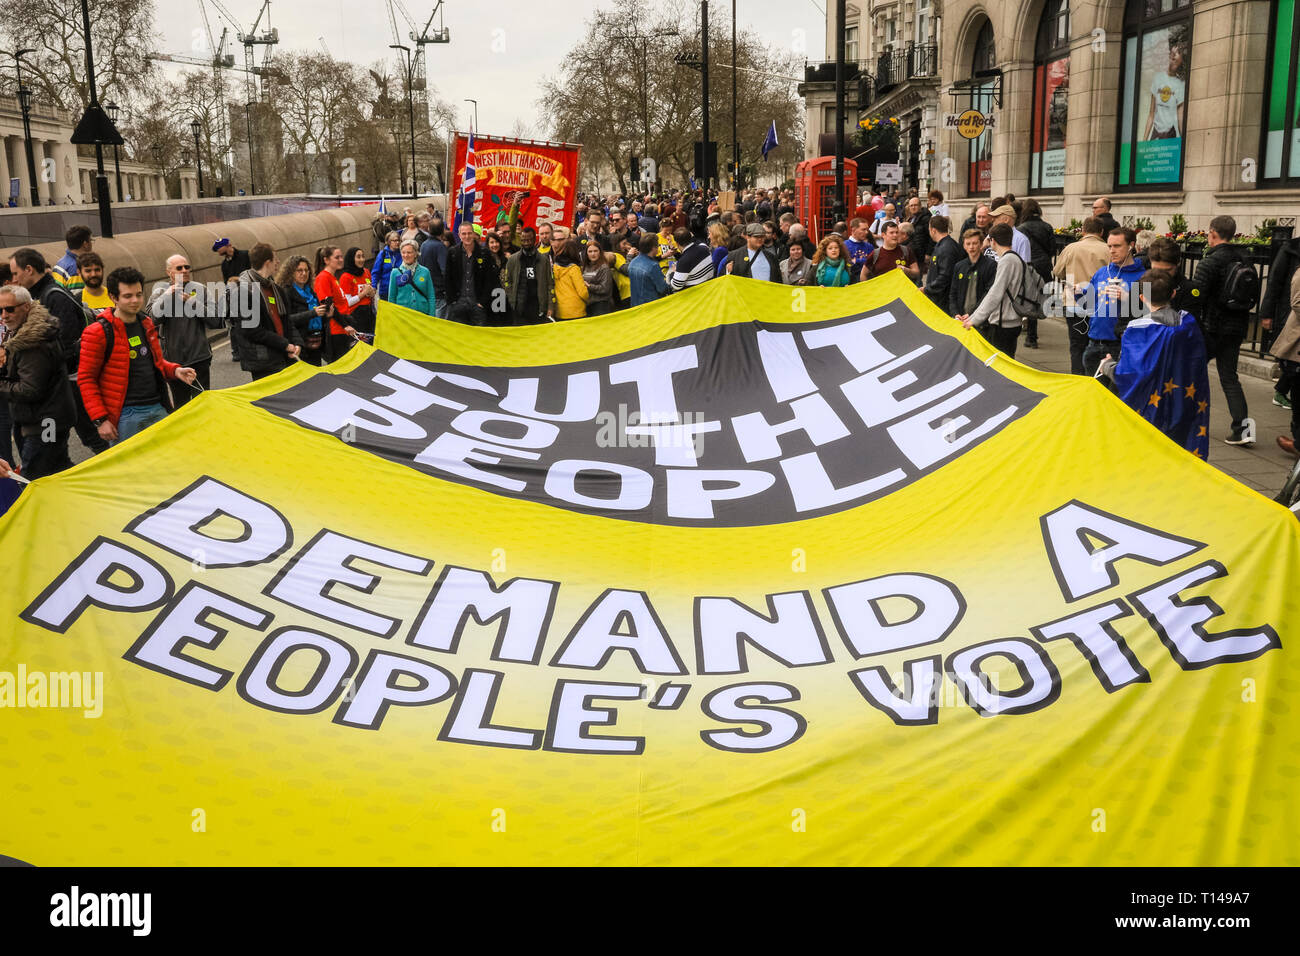 London, UK, 23rd Mar 2019. Protesters in colourful outfits with placards and banners. Protesters from all over the UK, and many British Ex-Pats from abroad, have travelled to join the 'People's Vote March', also referred to as the 'Put it to the People' march. The march, attended by hundreds of thousands, makes its way from Park Lane, along Piccadilly, Trafalgar Square and Whitehall to end with speeches by campaigners and politicians in Parliament Square, Westminster. Stock Photo